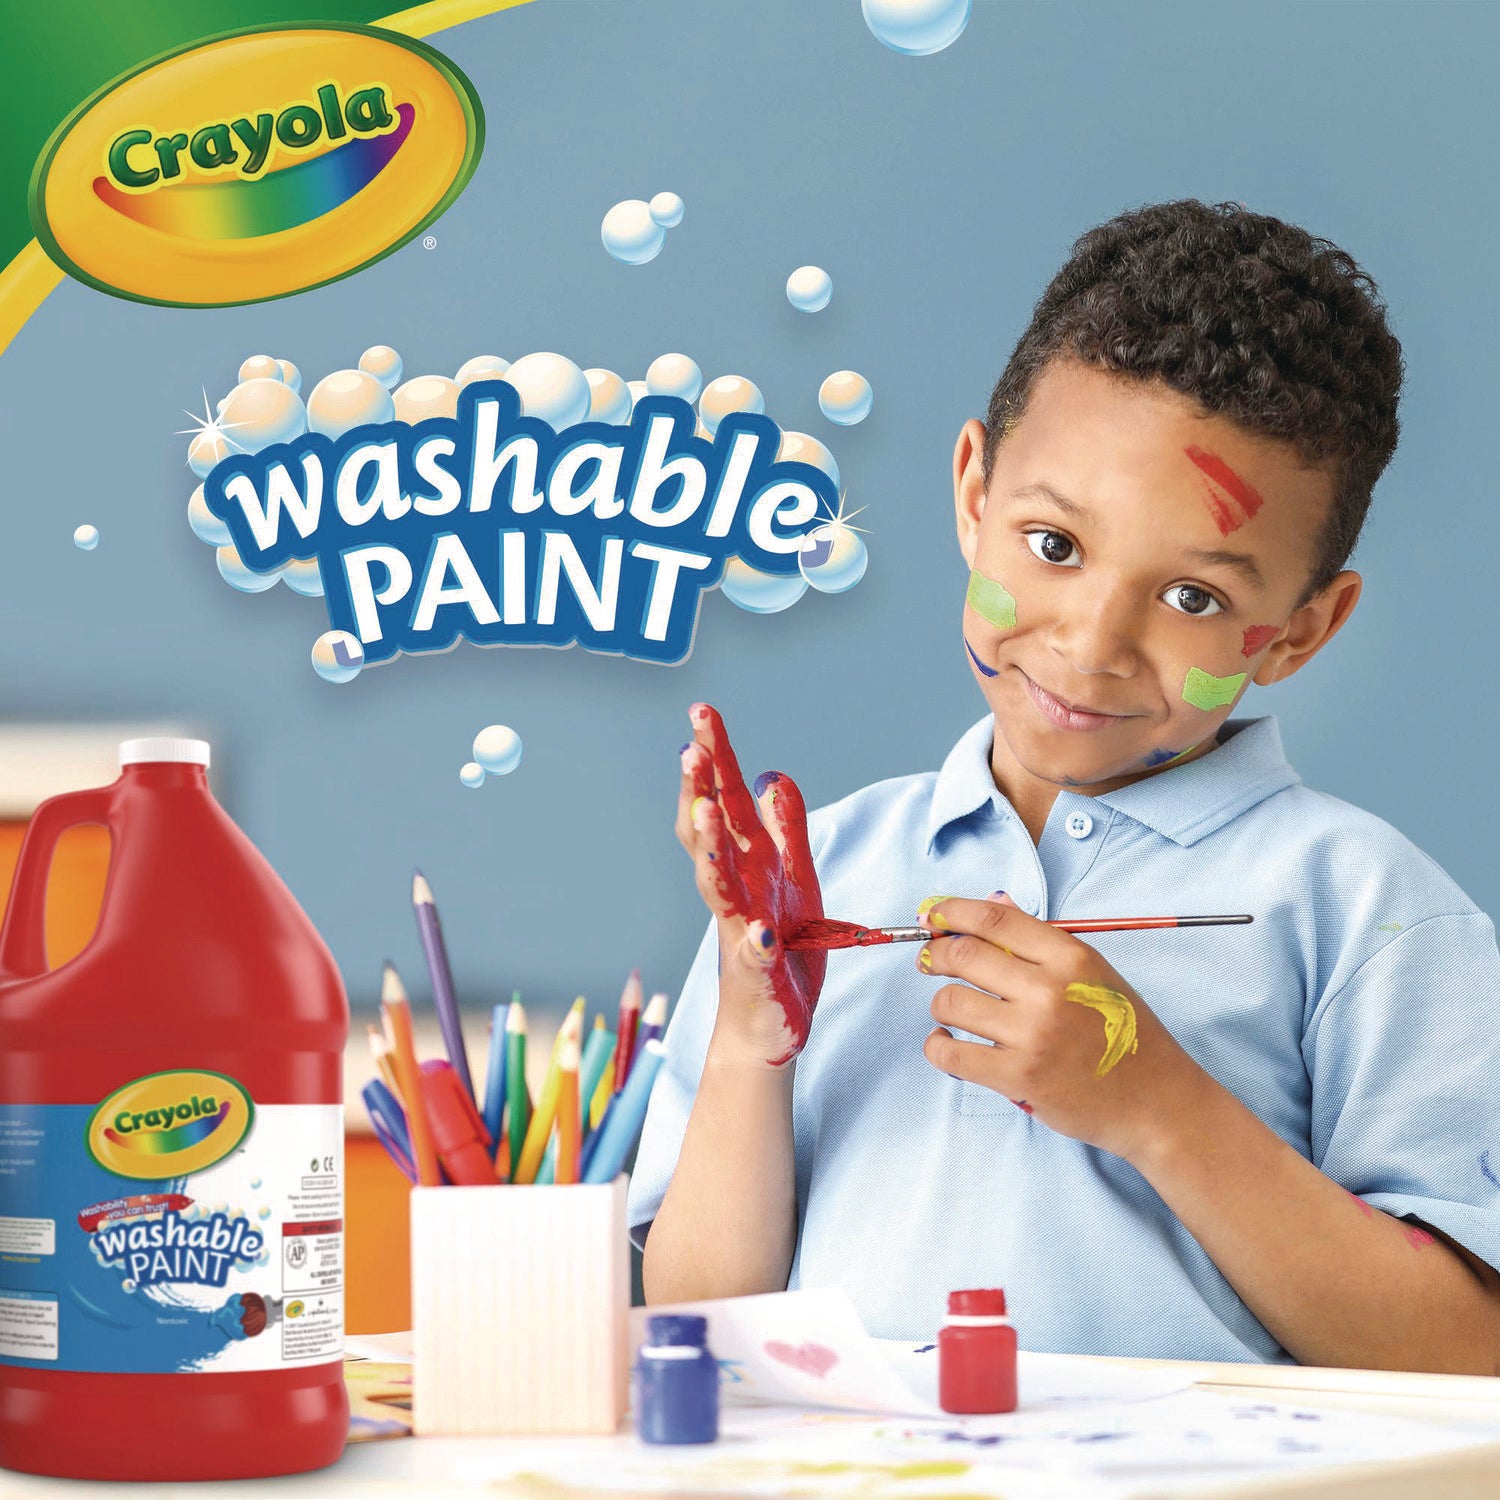 Washable Paint, Red, 1 gal Bottle - 2